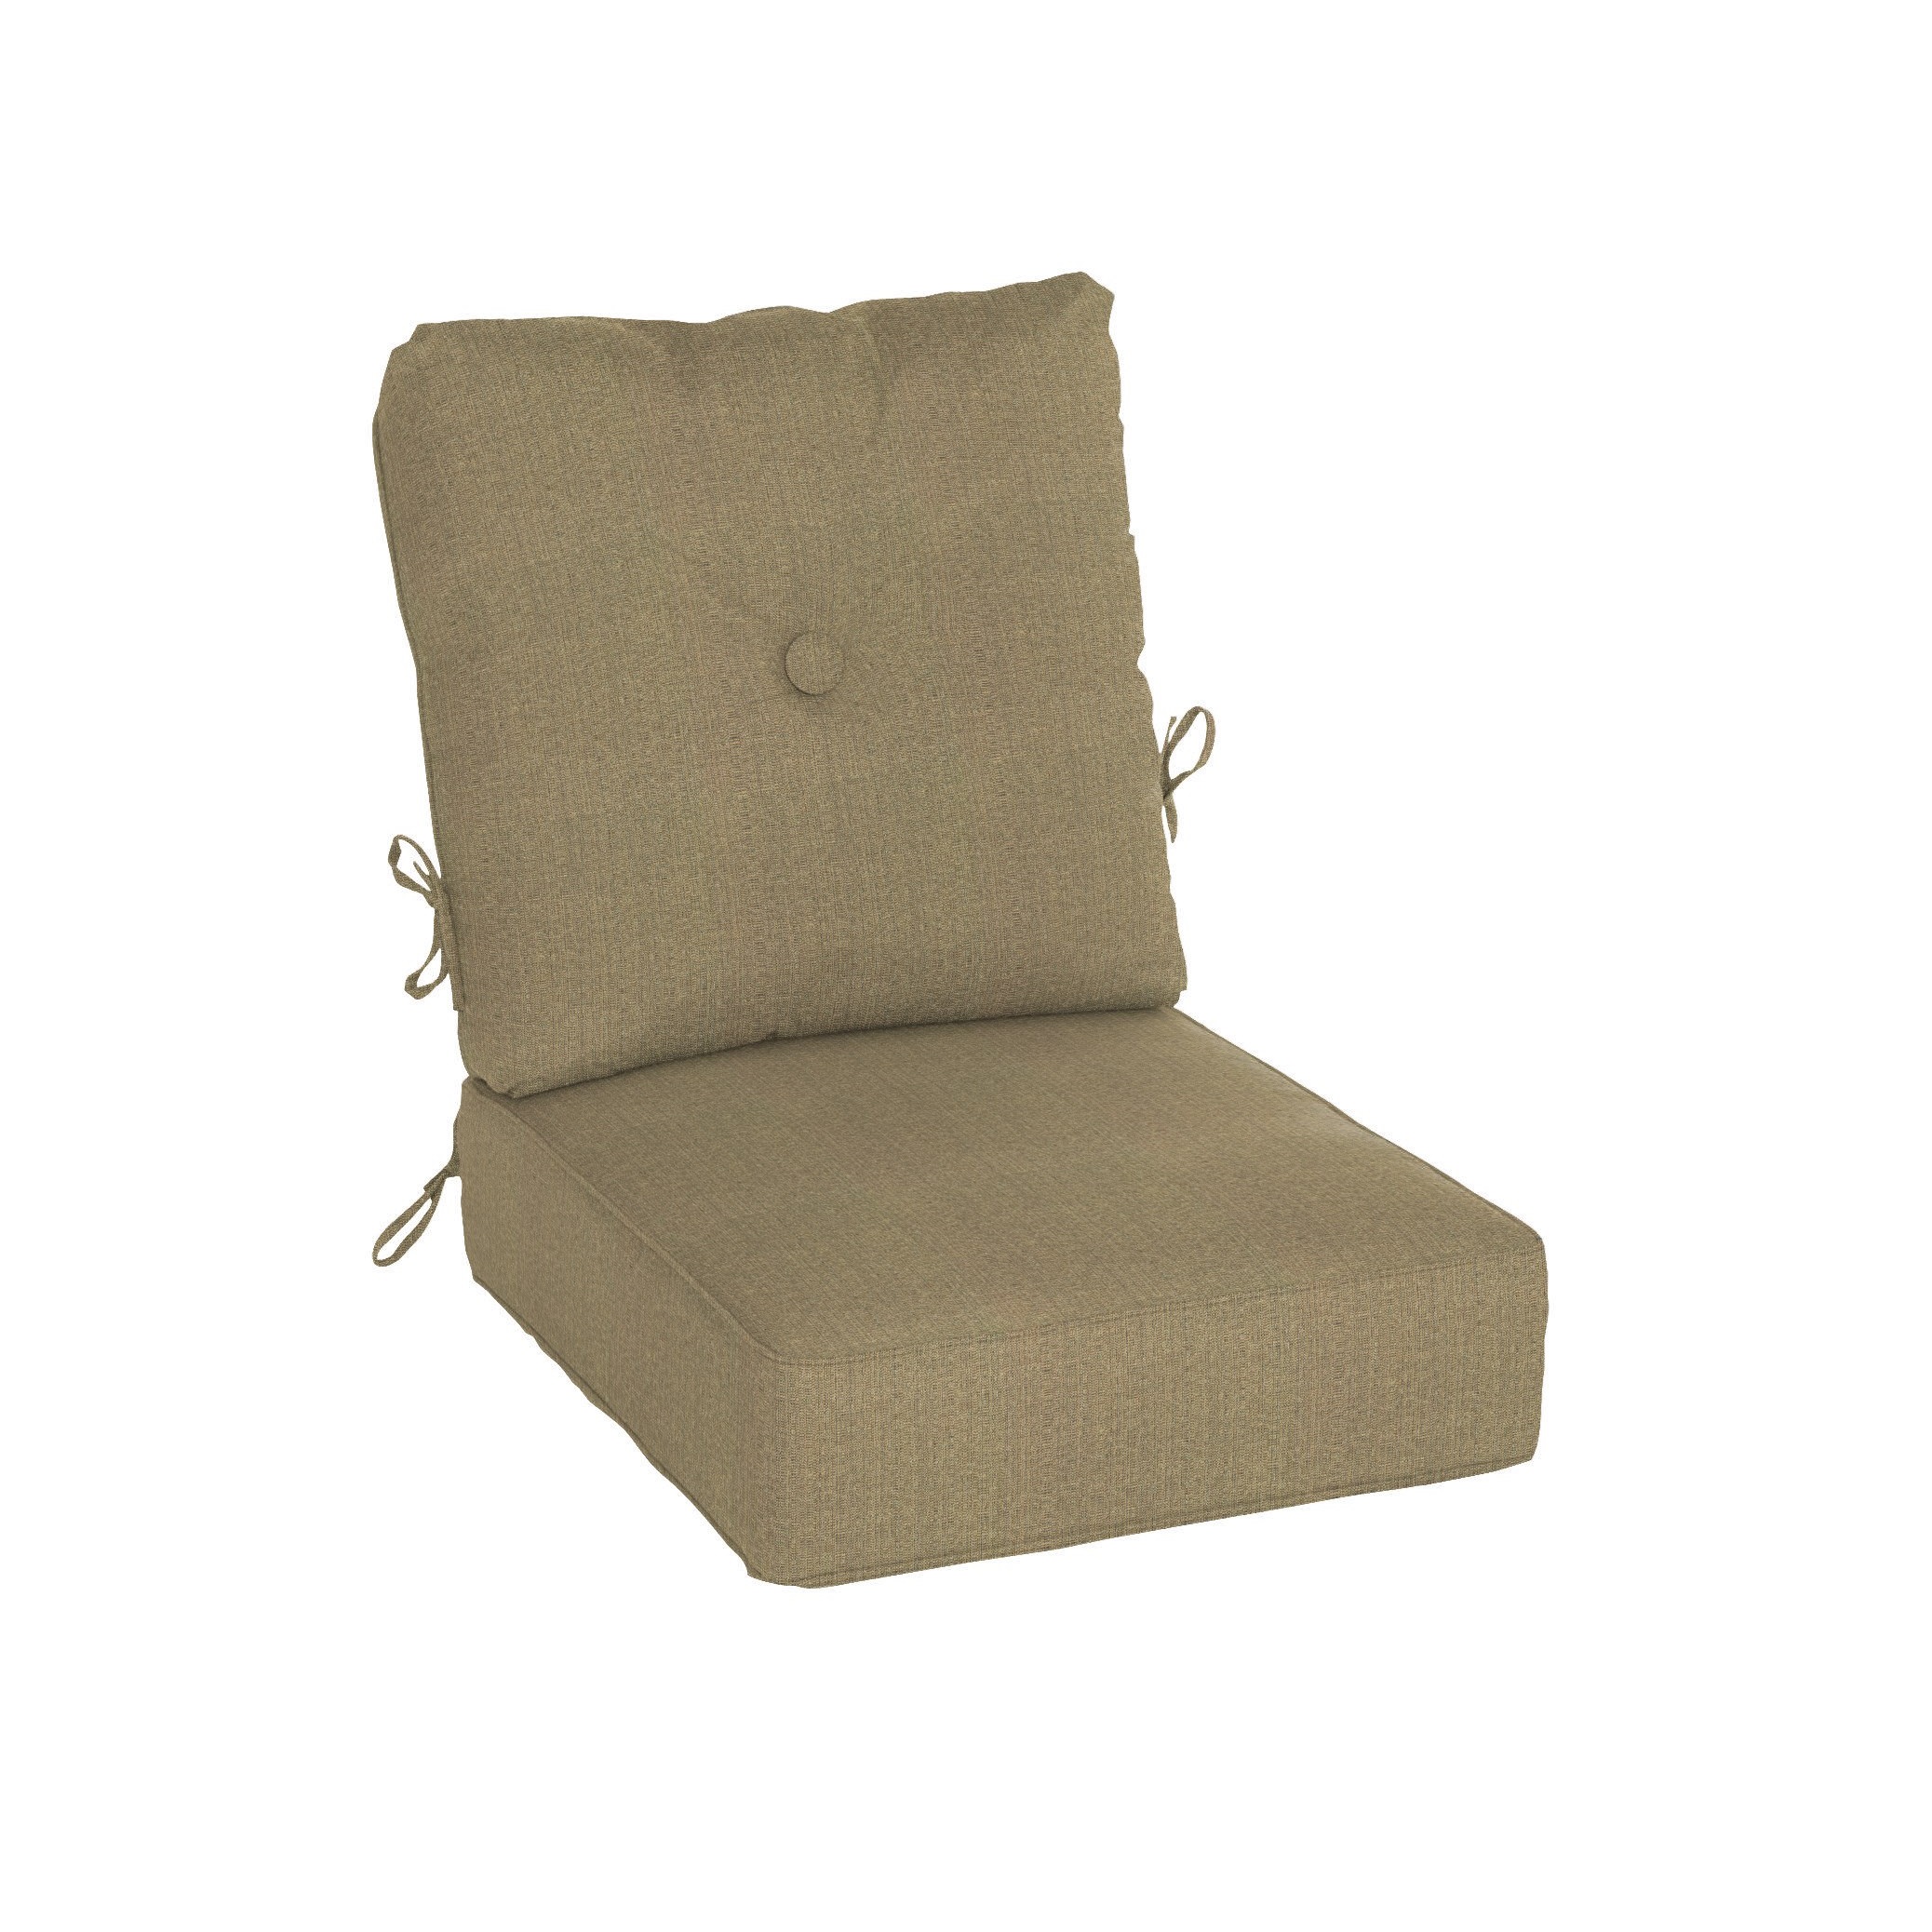 pampas linen water resistant estate chair cushion product image